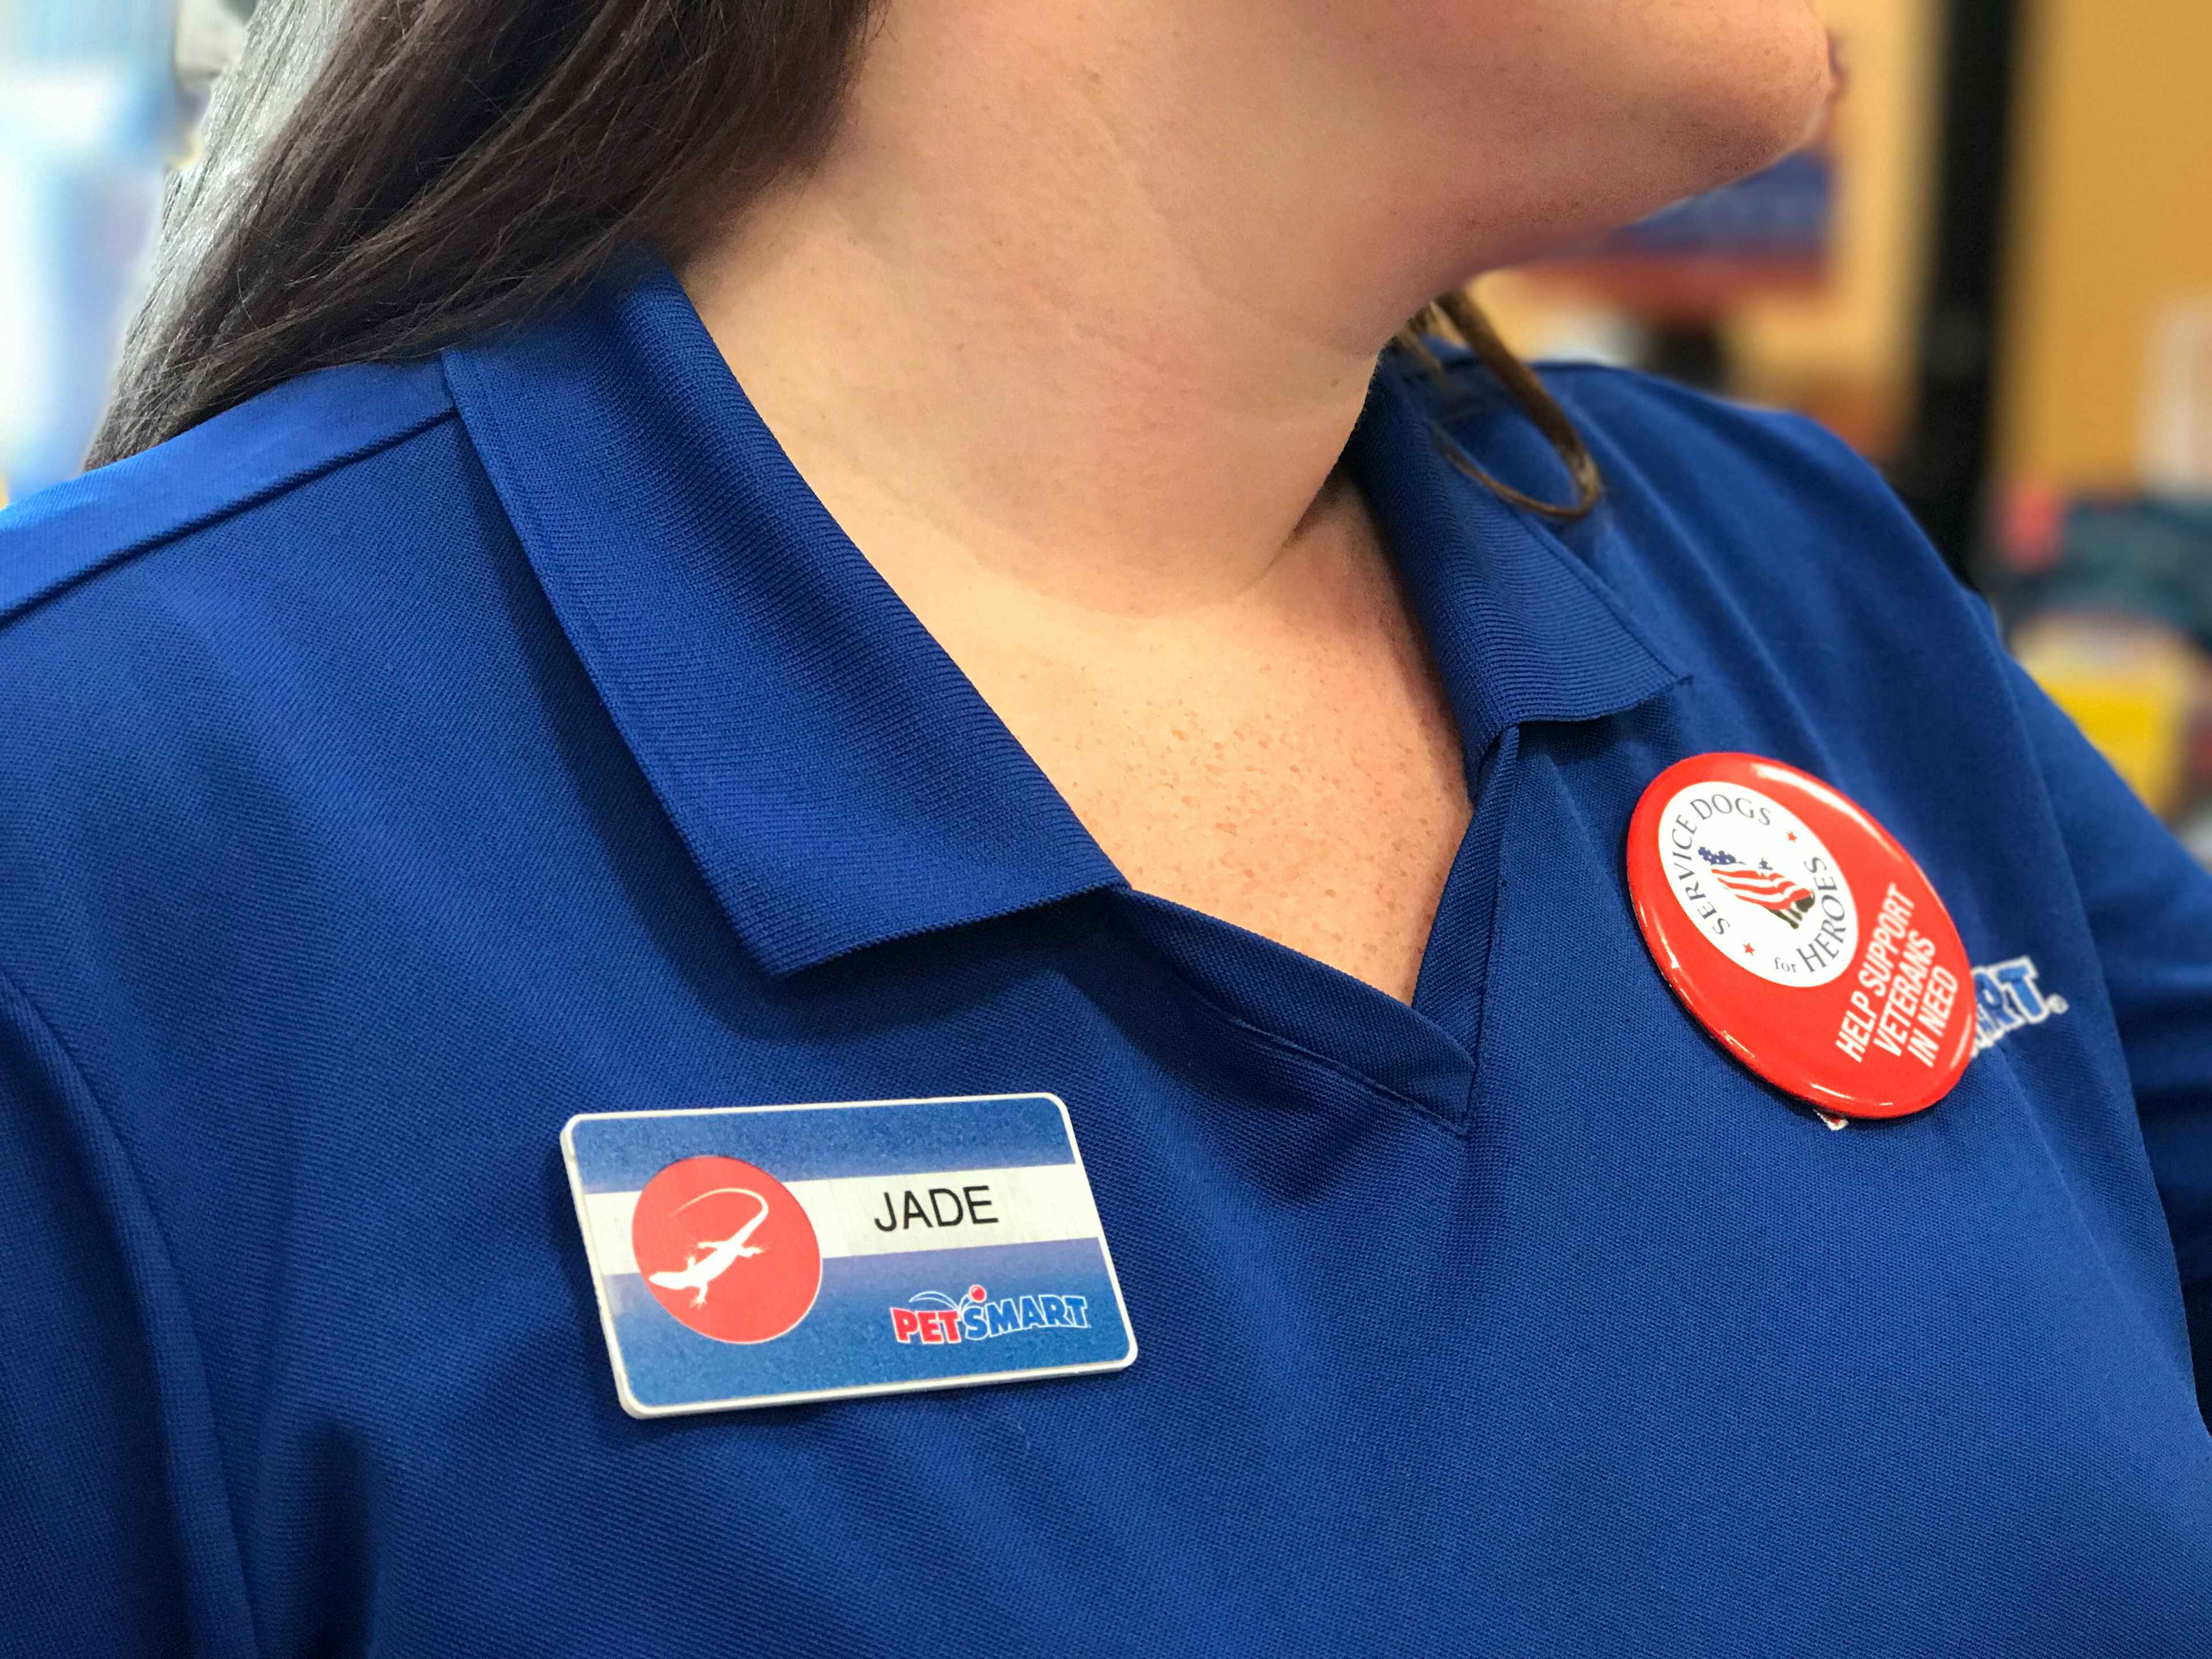 A close-up of a PetSmart employee, showing her name tag that reads, "Jade".